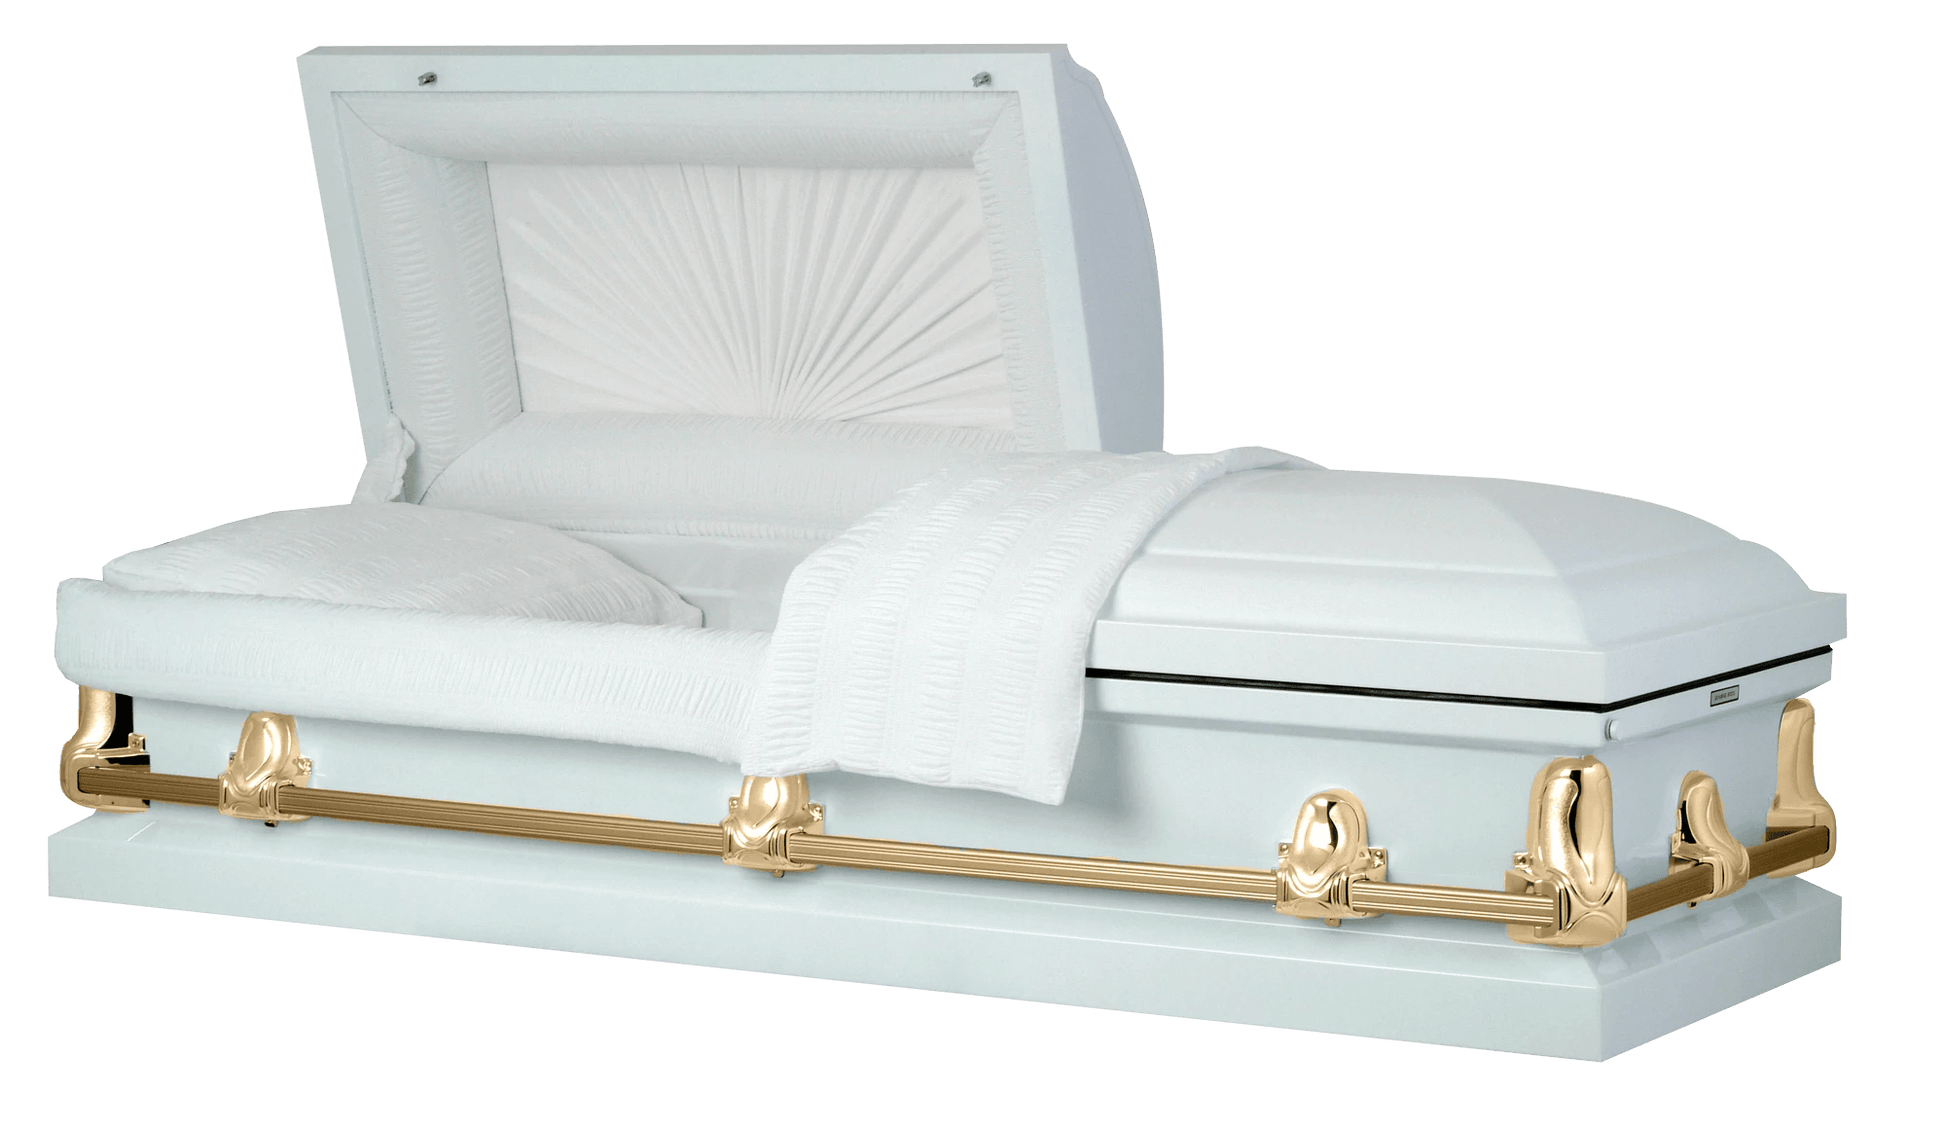 White and Gold Steel Casket